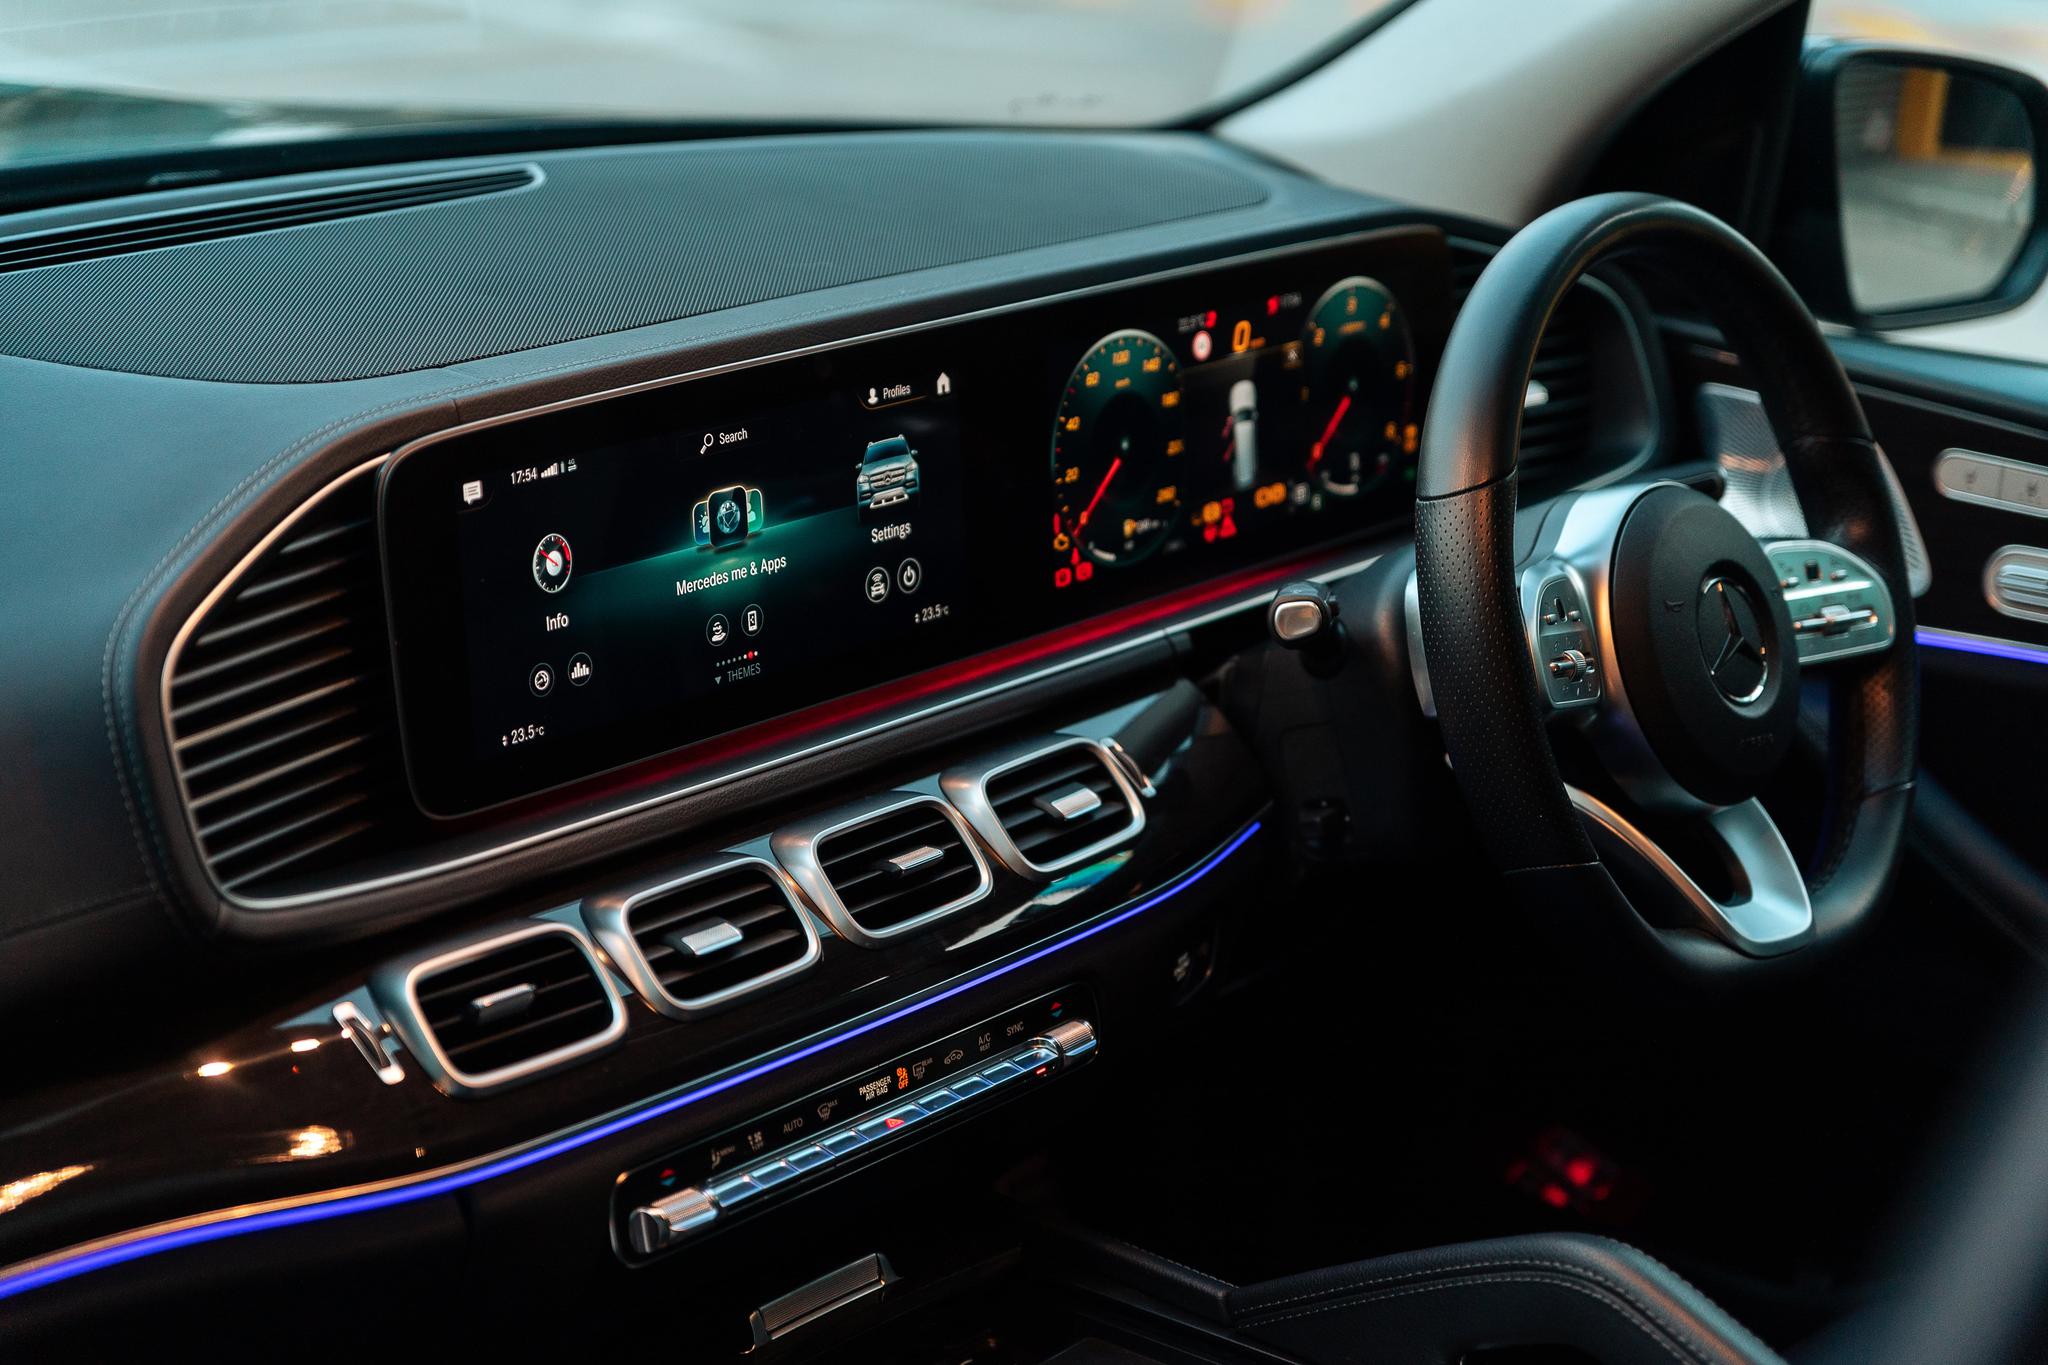 The 12.3-inch displays that house the latest MBUX infotainment